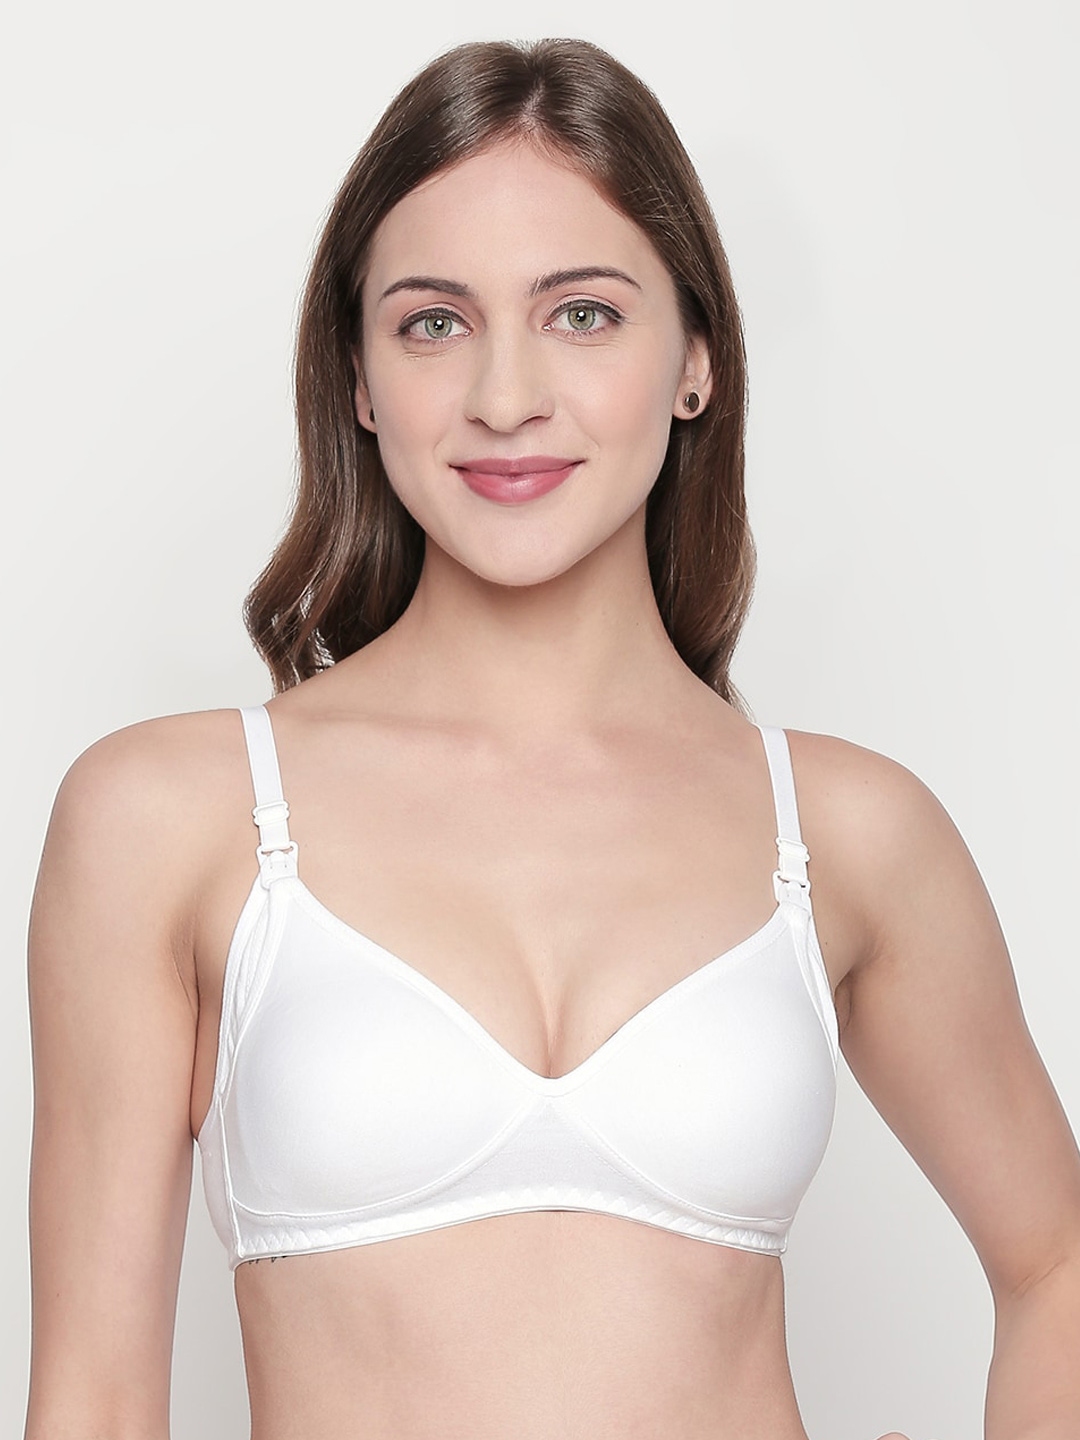 Buy Lovable White Maternity Bra Non-Wired - 34B at